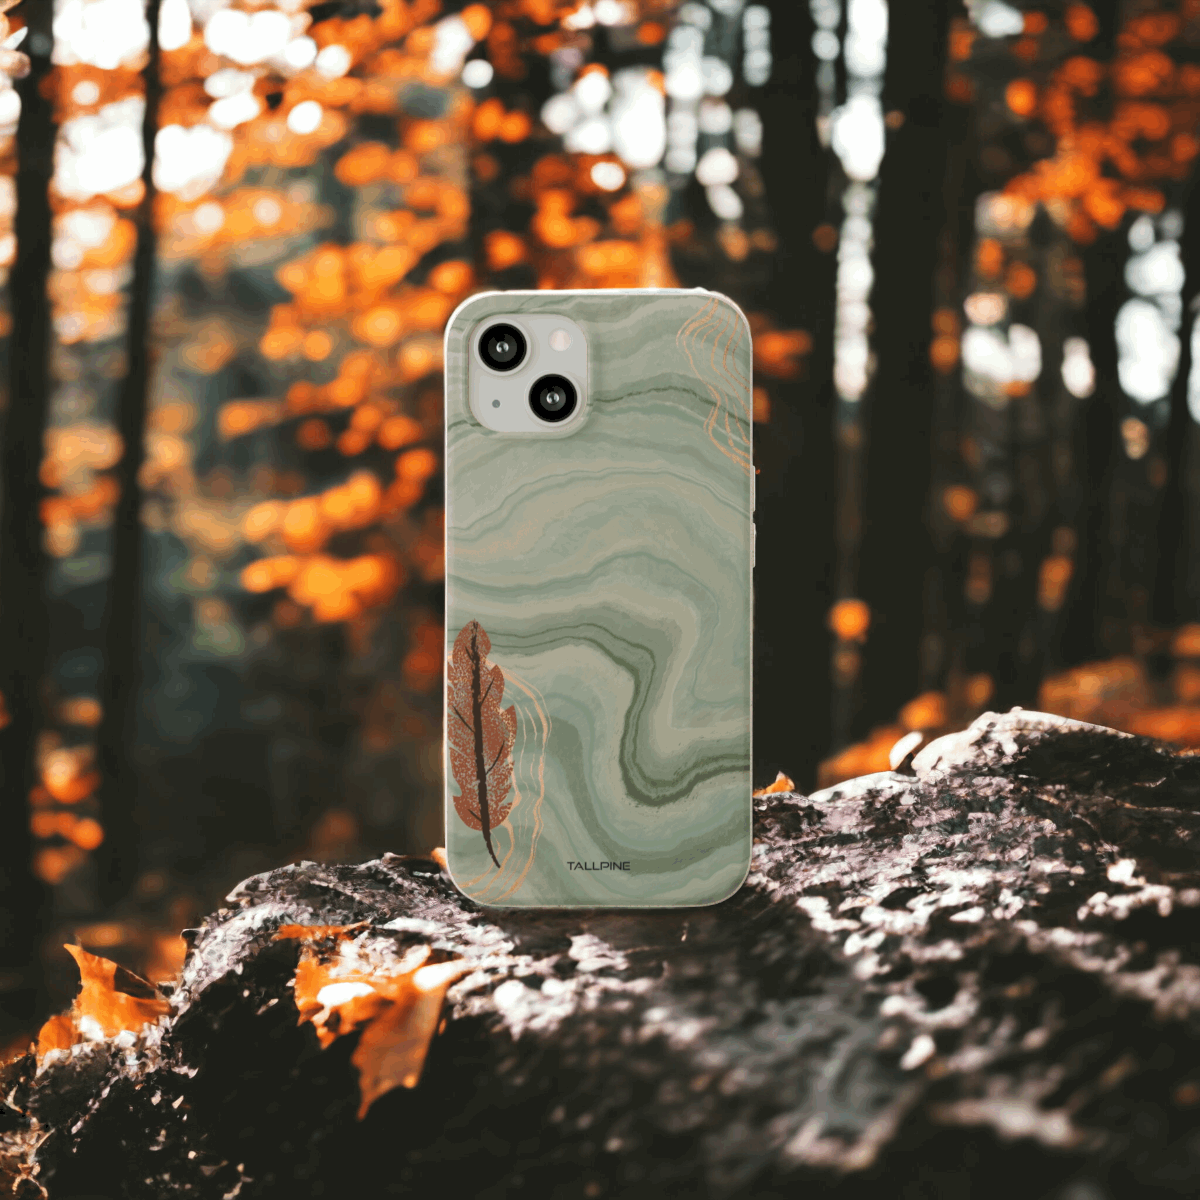 Autumn Leaf - Eco Case - Tallpine Cases | Sustainable and Eco-Friendly Phone Cases - Green Leaves Nature New